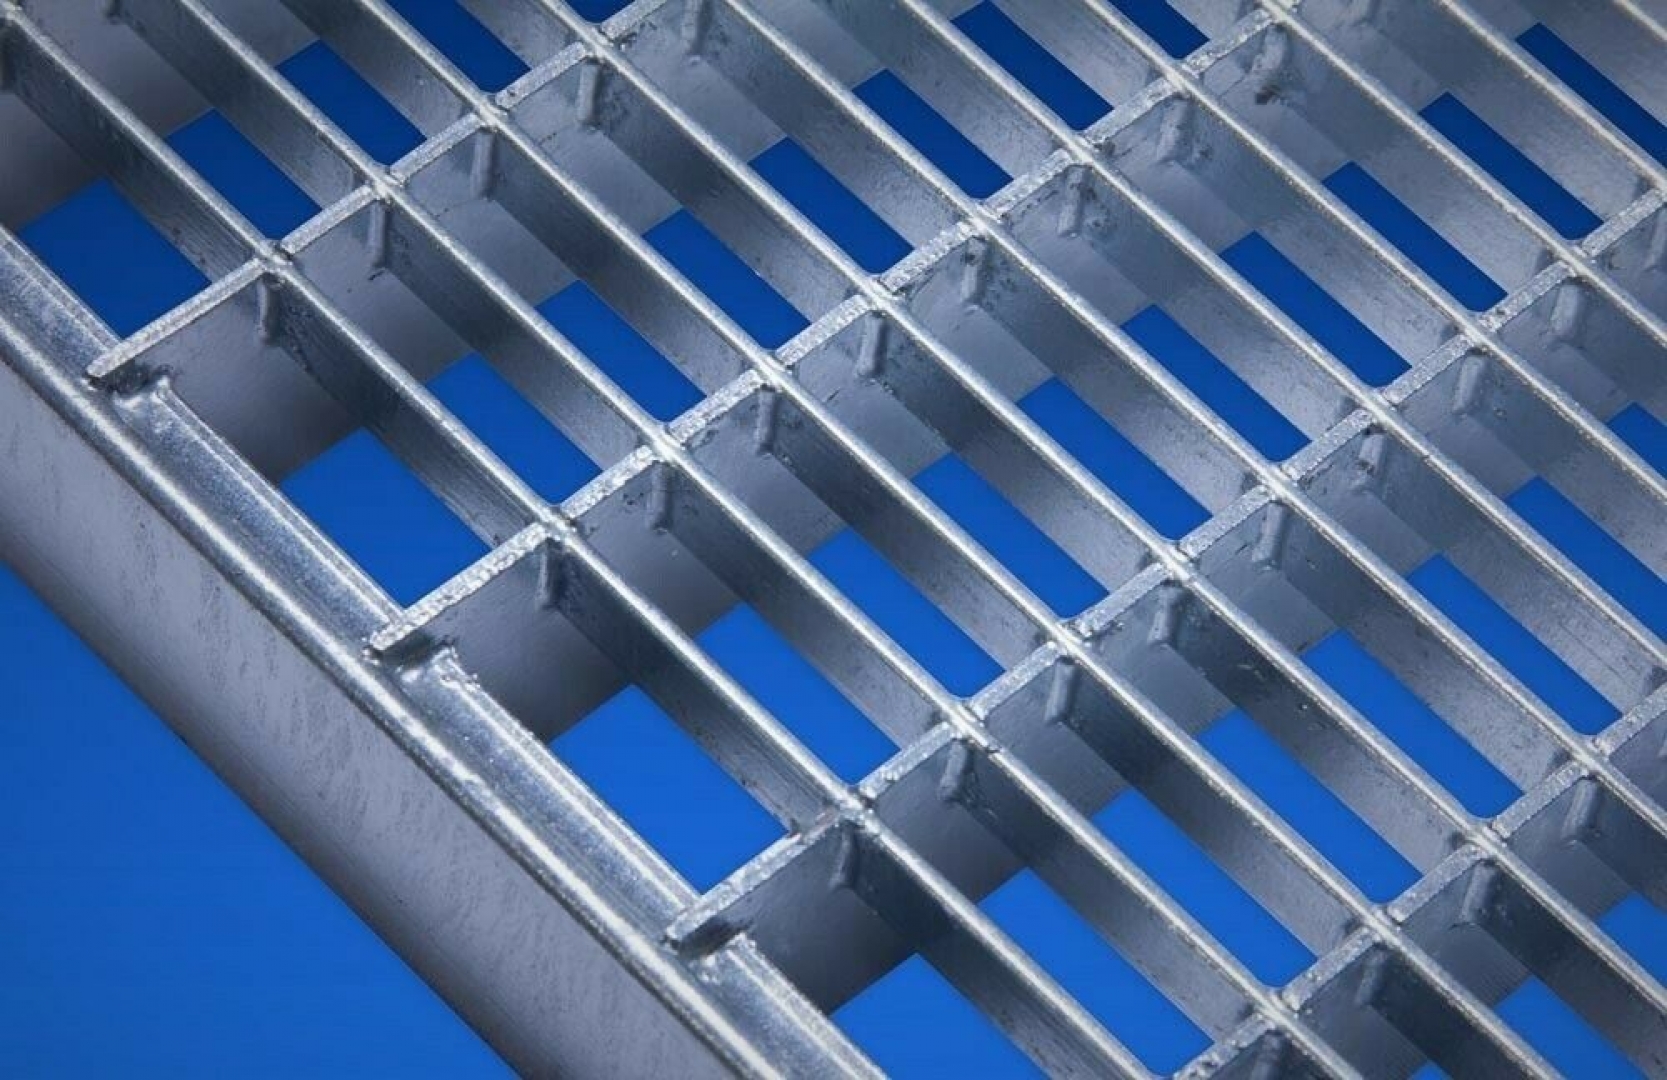 Baunorm grating 490x740mm galvanized mesh size 30x10mm height 20mm without frame